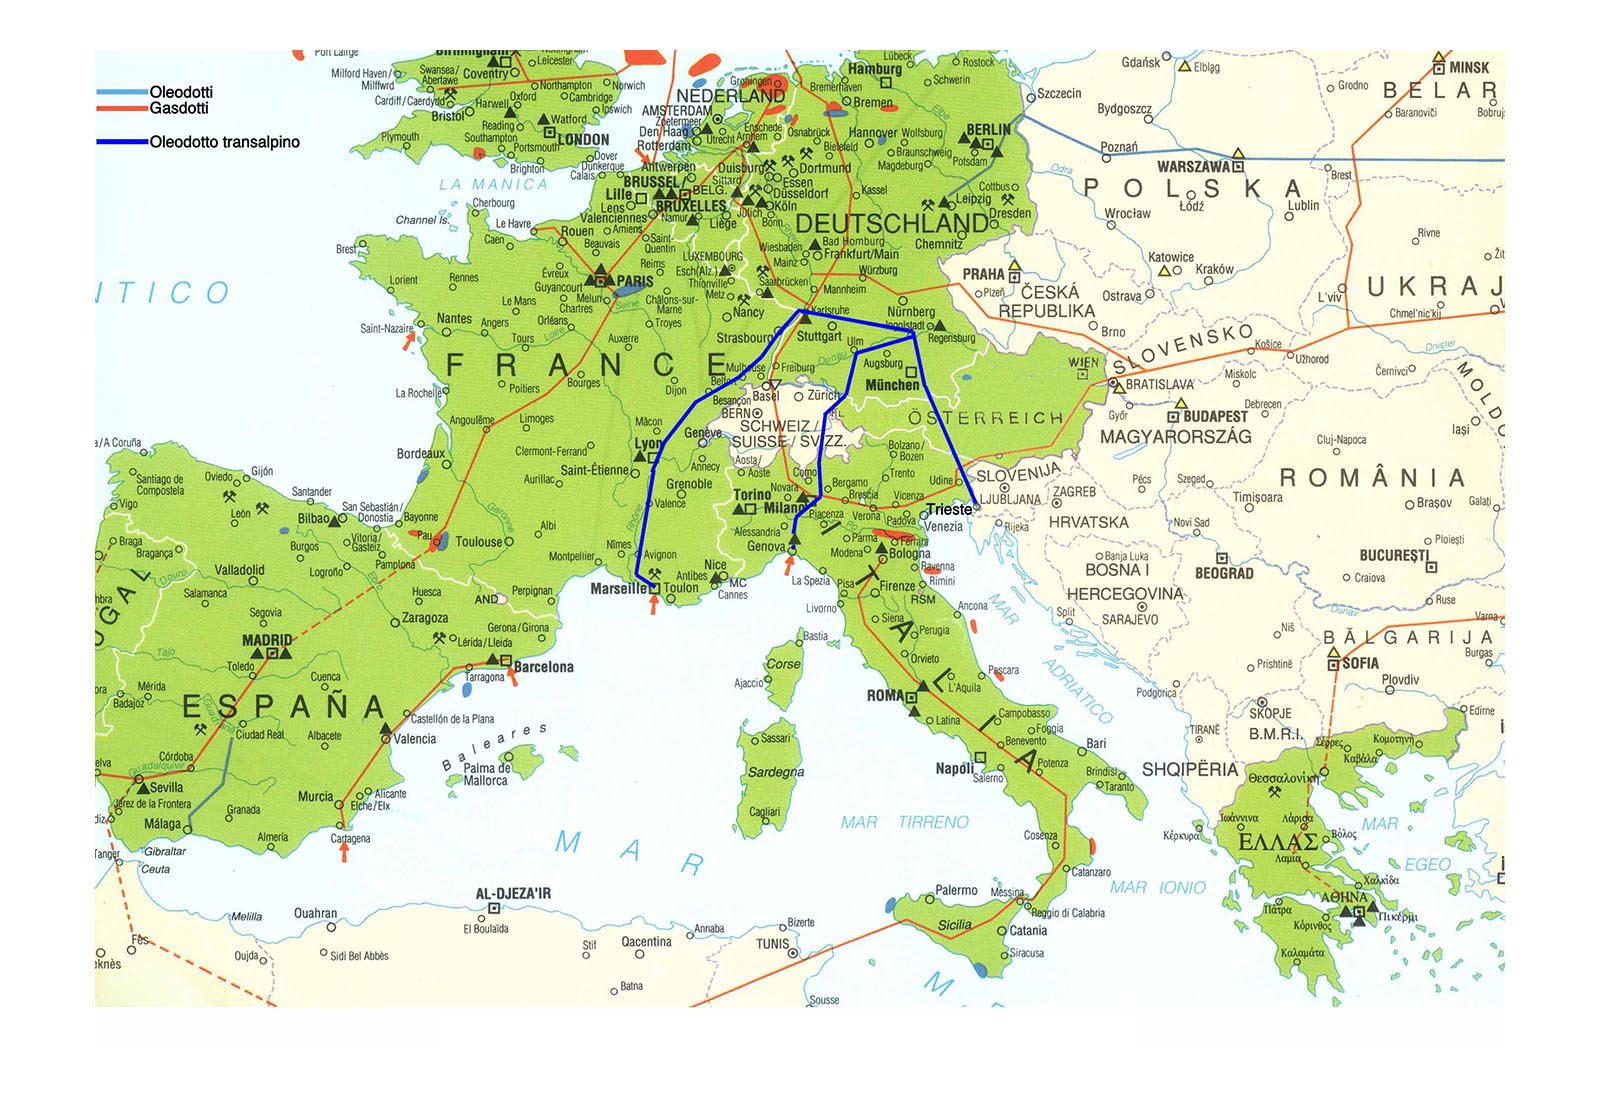 Development of the Trieste area - The oil pipeline networks